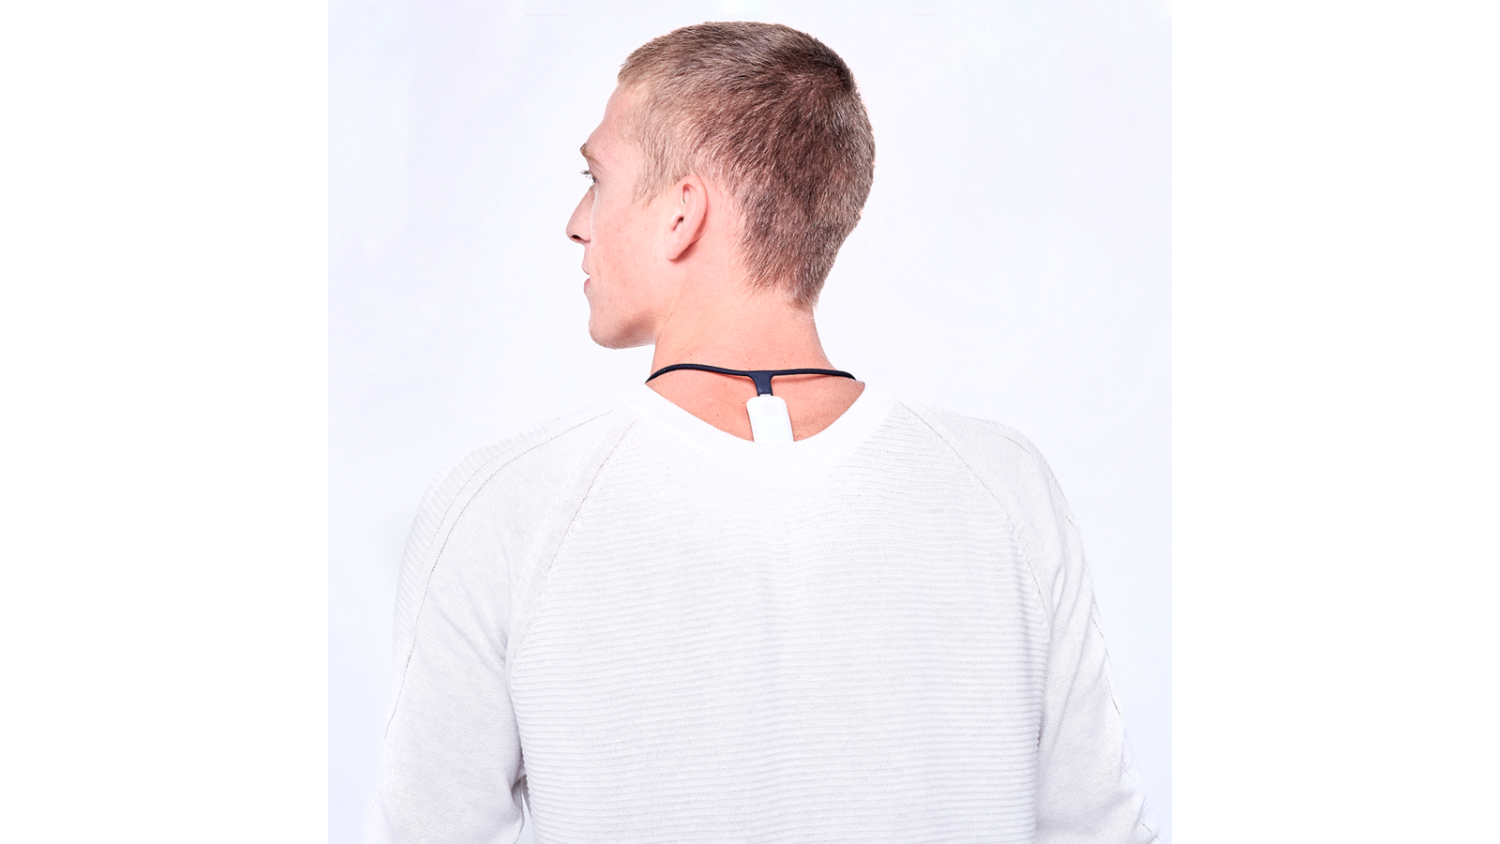 UPRIGHT GO 2 & Go S Necklace for The Posture Position Corrector Trainer  System £19.95 - PicClick UK